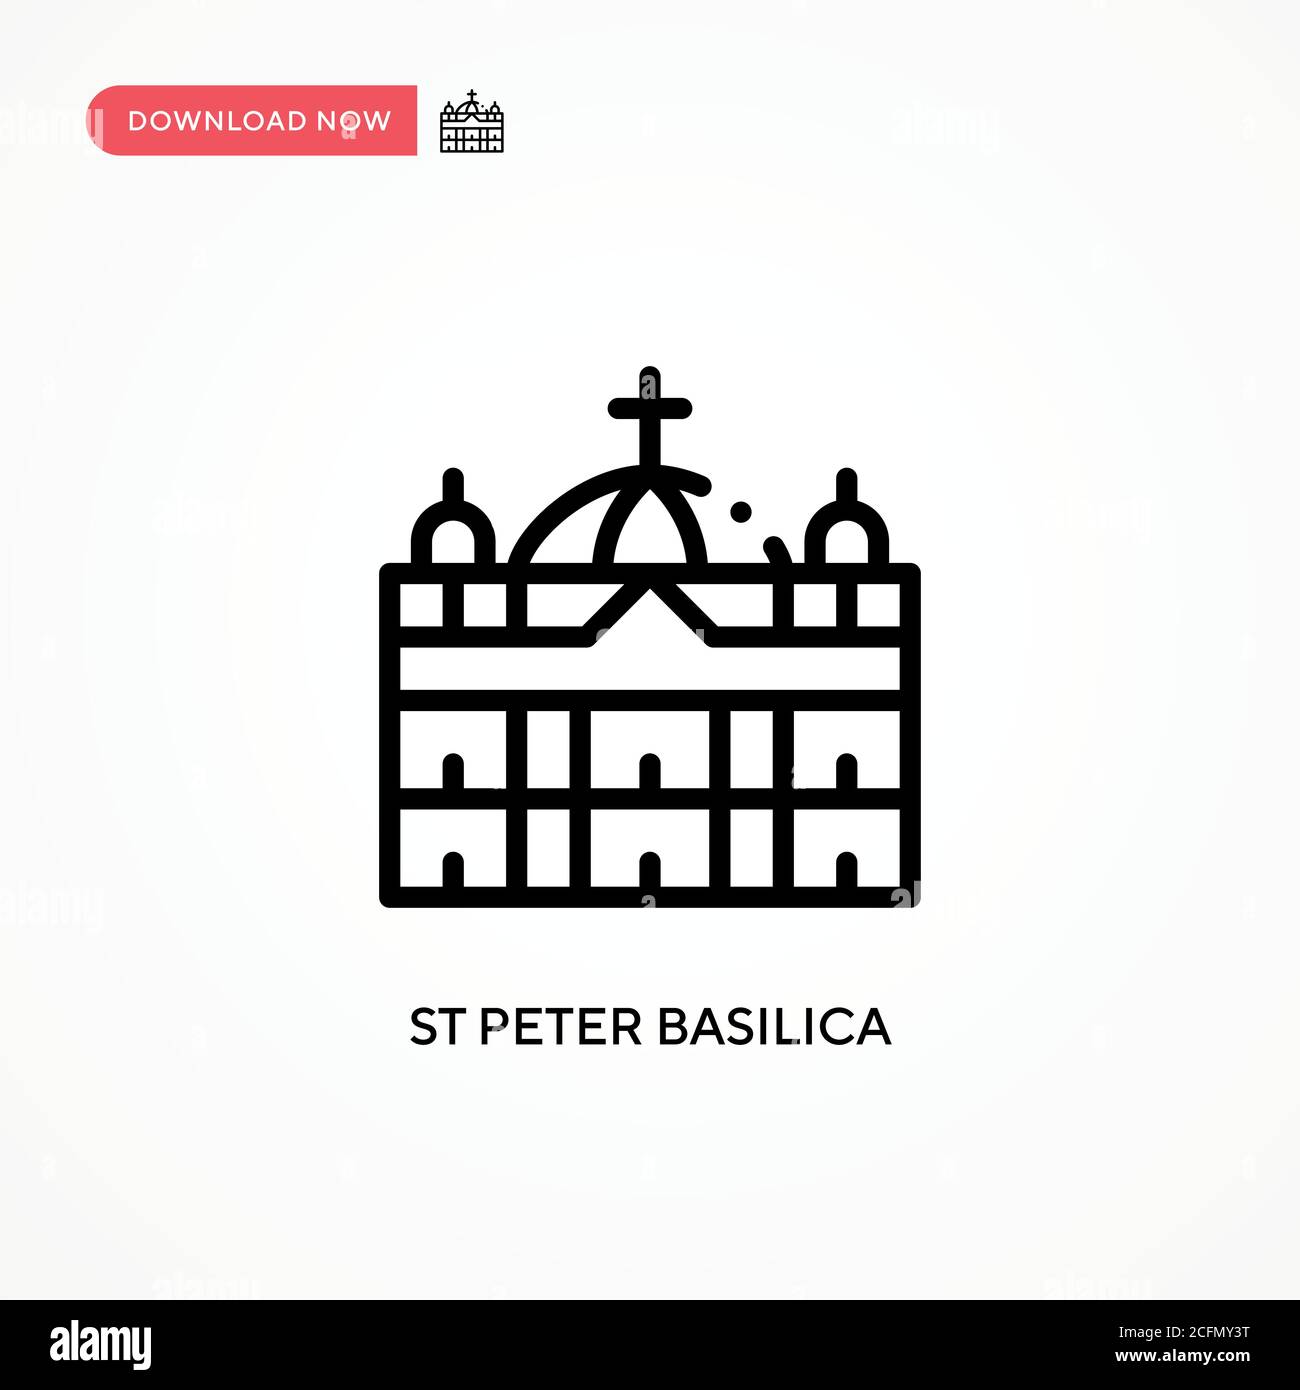 St peter basilica vector icon. Modern, simple flat vector illustration for web site or mobile app Stock Vector